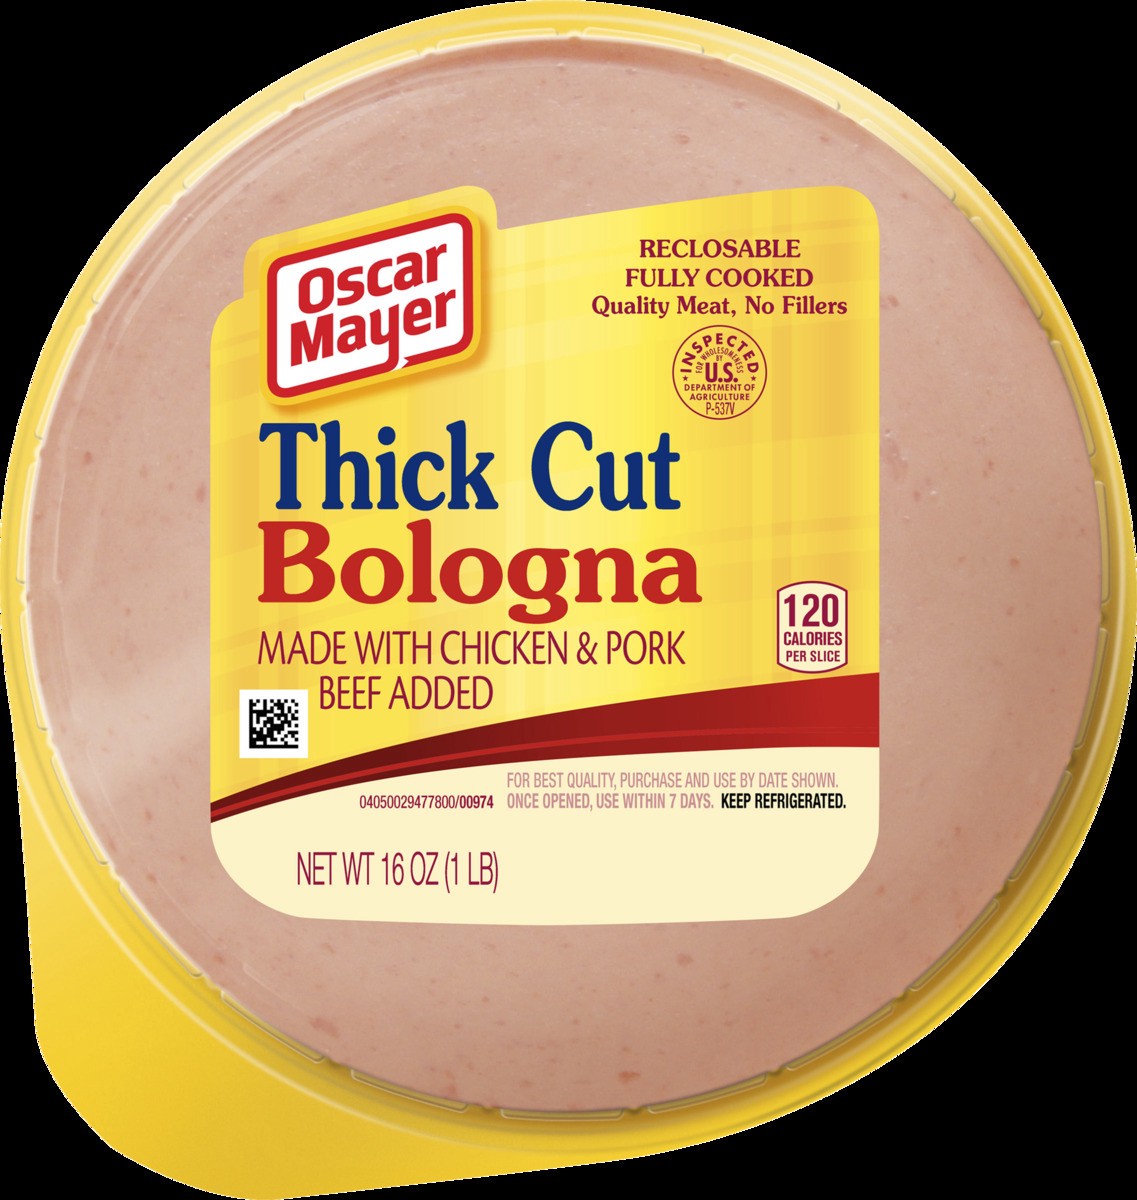 slide 2 of 2, Oscar Mayer Thick Cut Bologna Made with Chicken & Pork, Beef added Sliced Lunch Meat, 16 oz. Pack, 16 oz